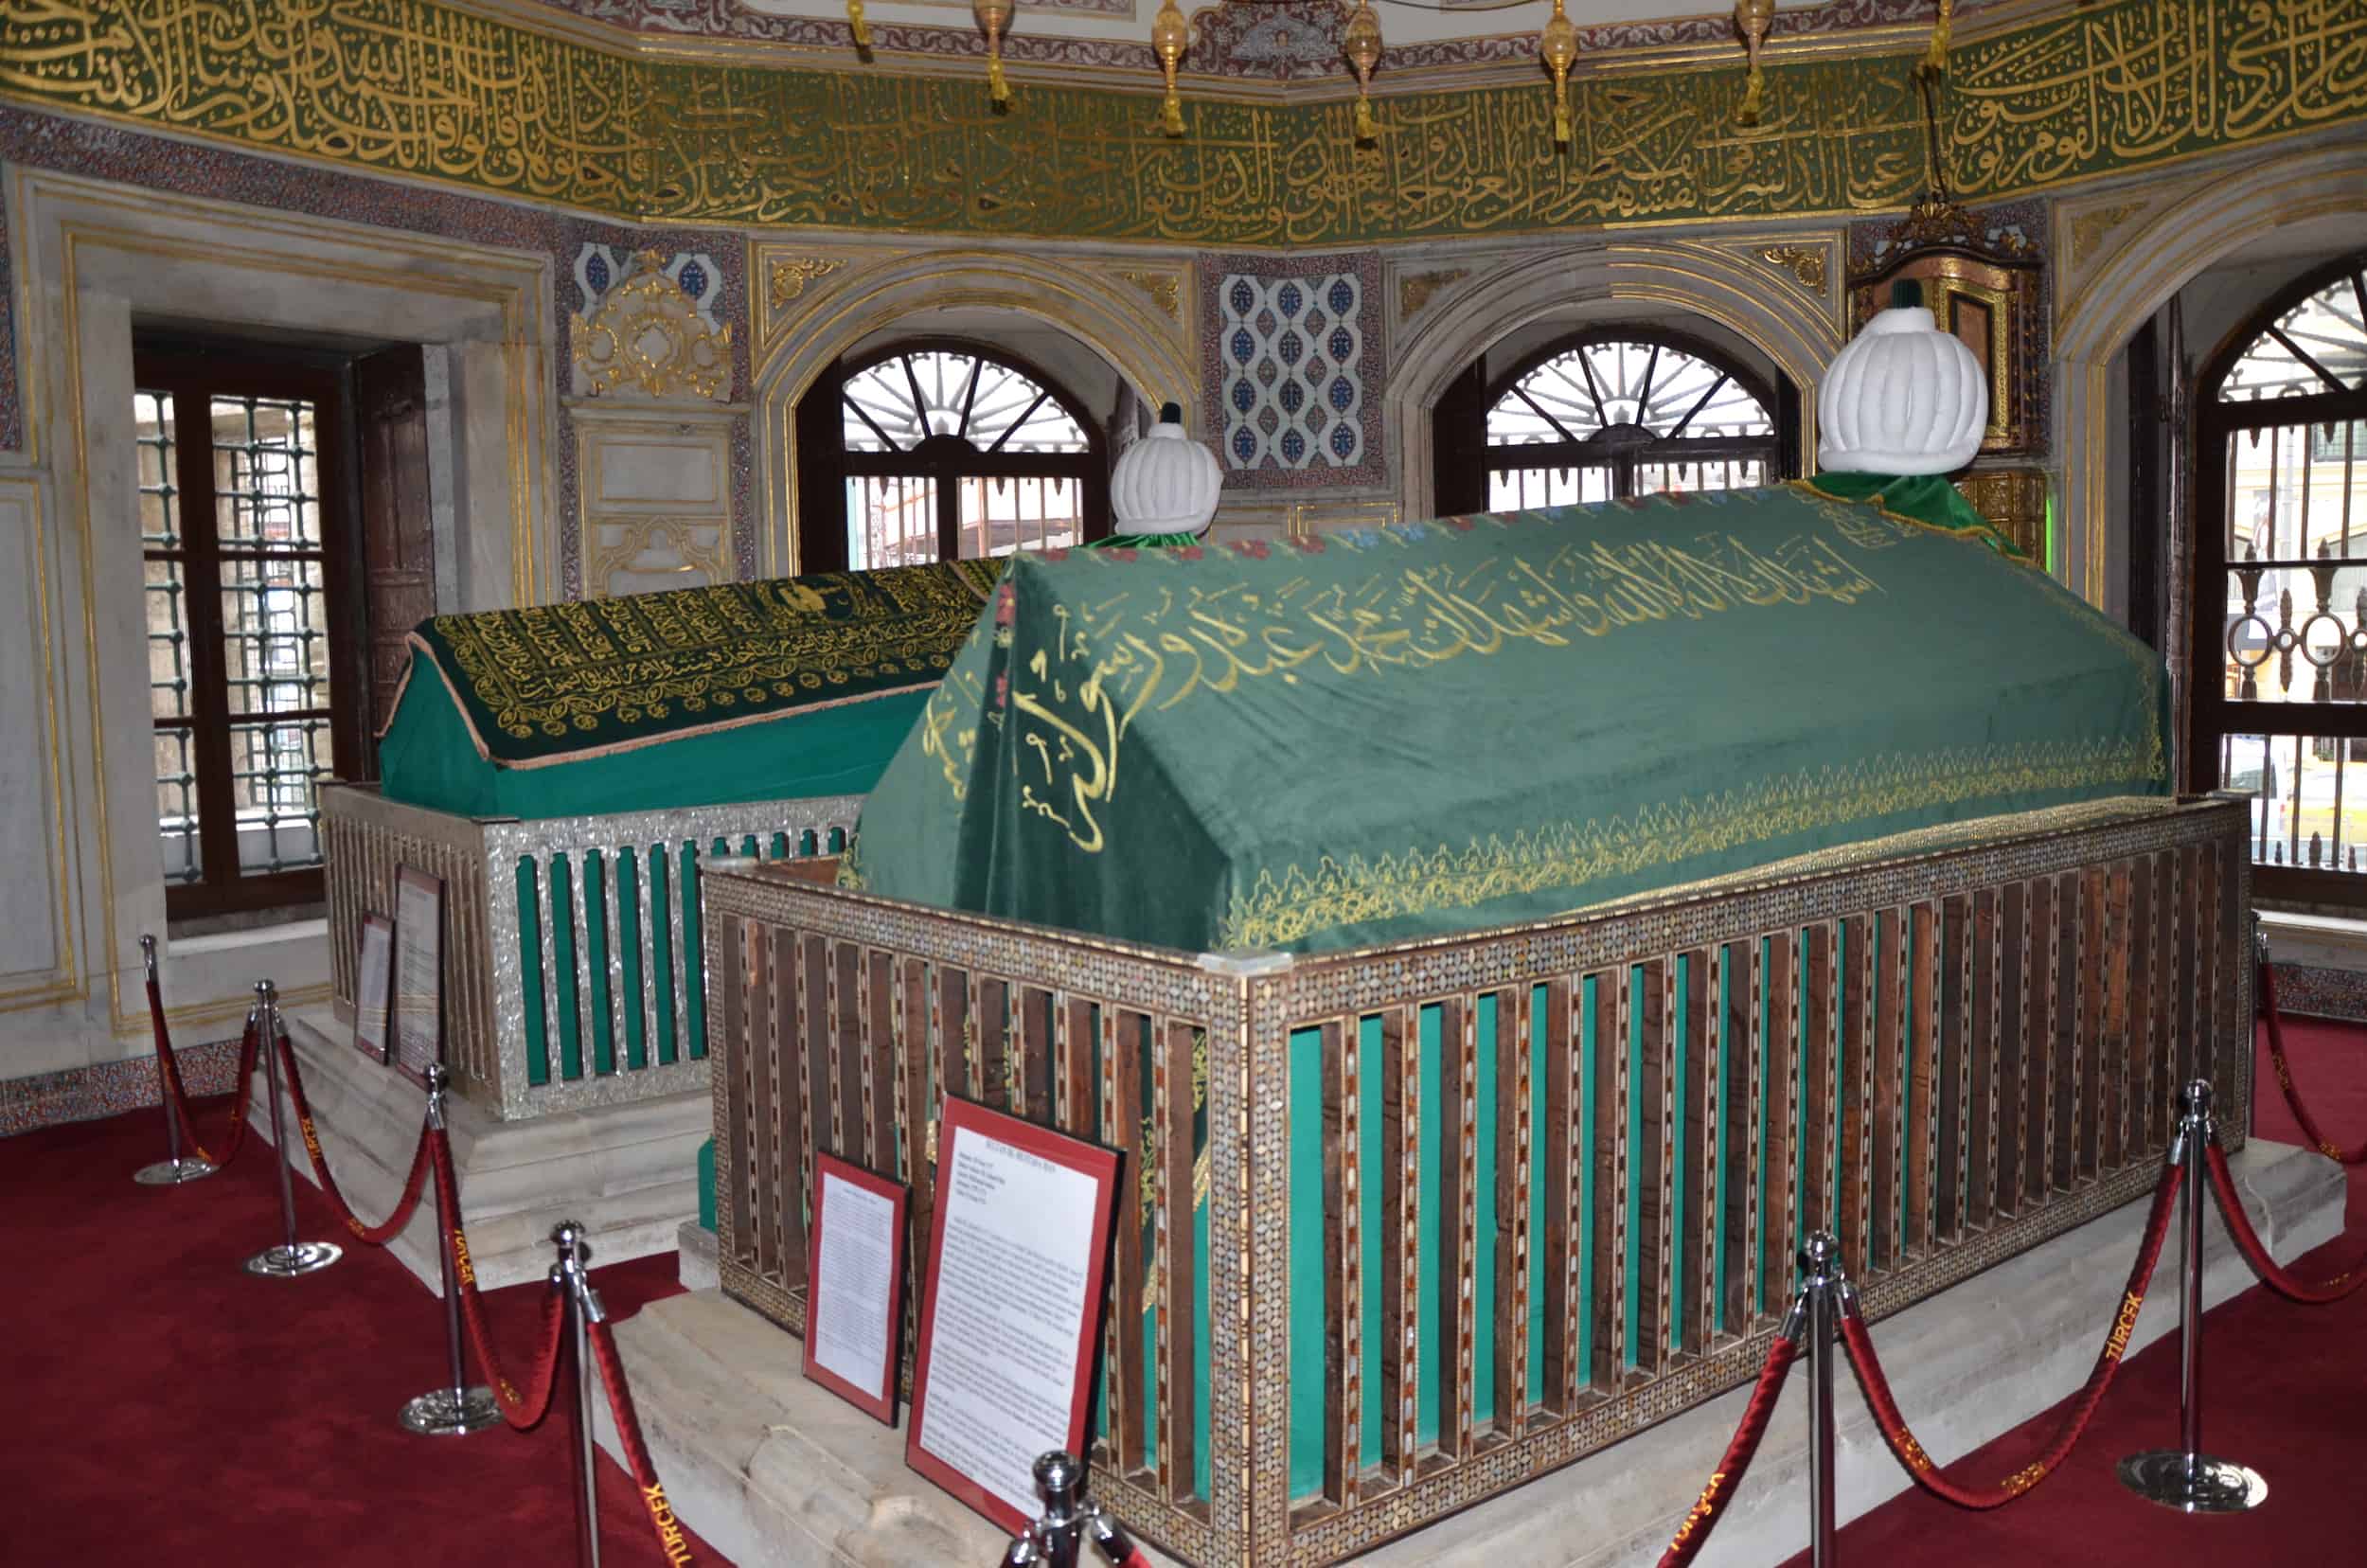 Sarcophagi of two sultans at the Tomb of Mustafa III